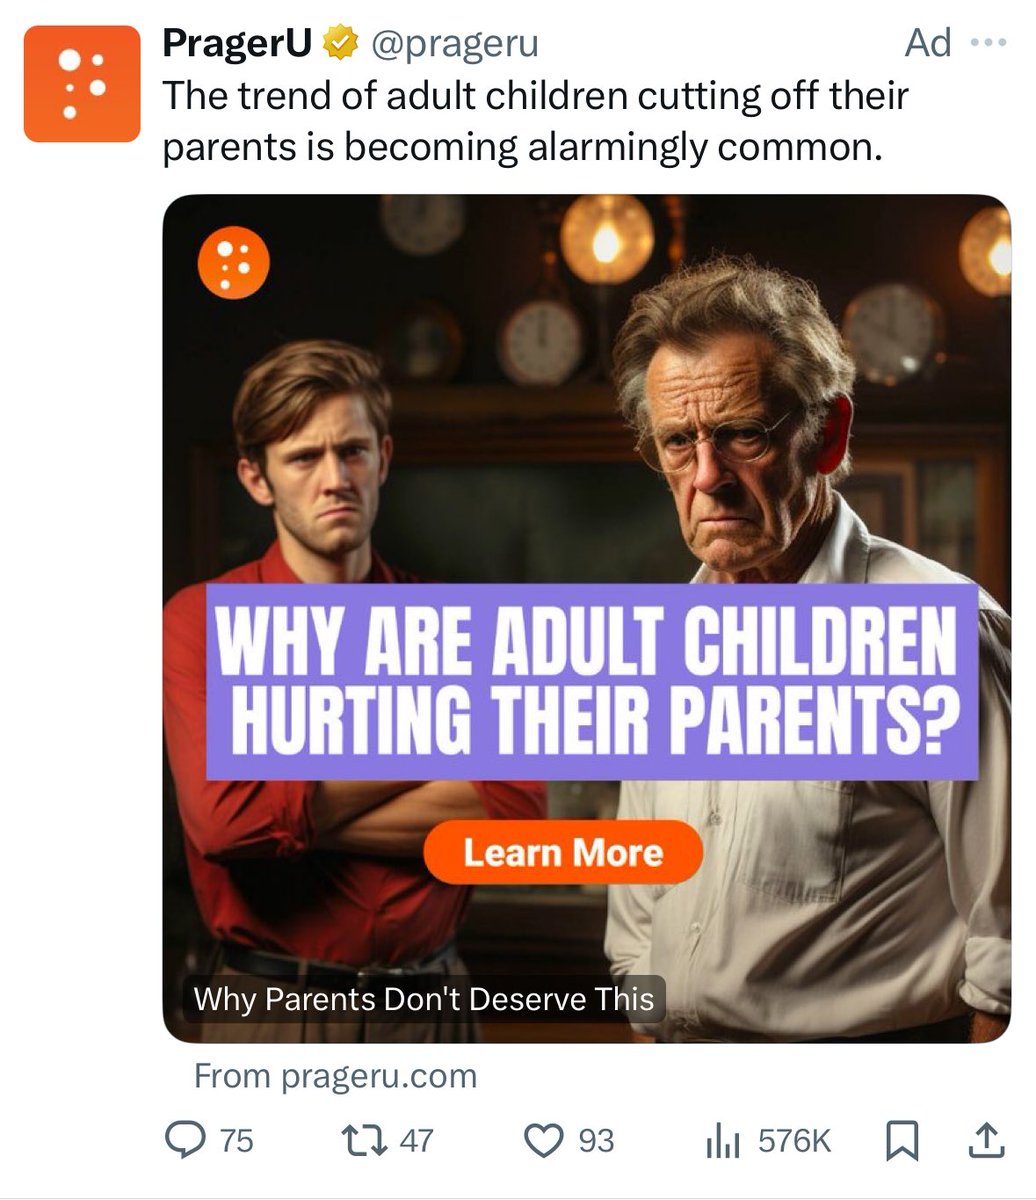 Gotta hand it to prager, they know their audience